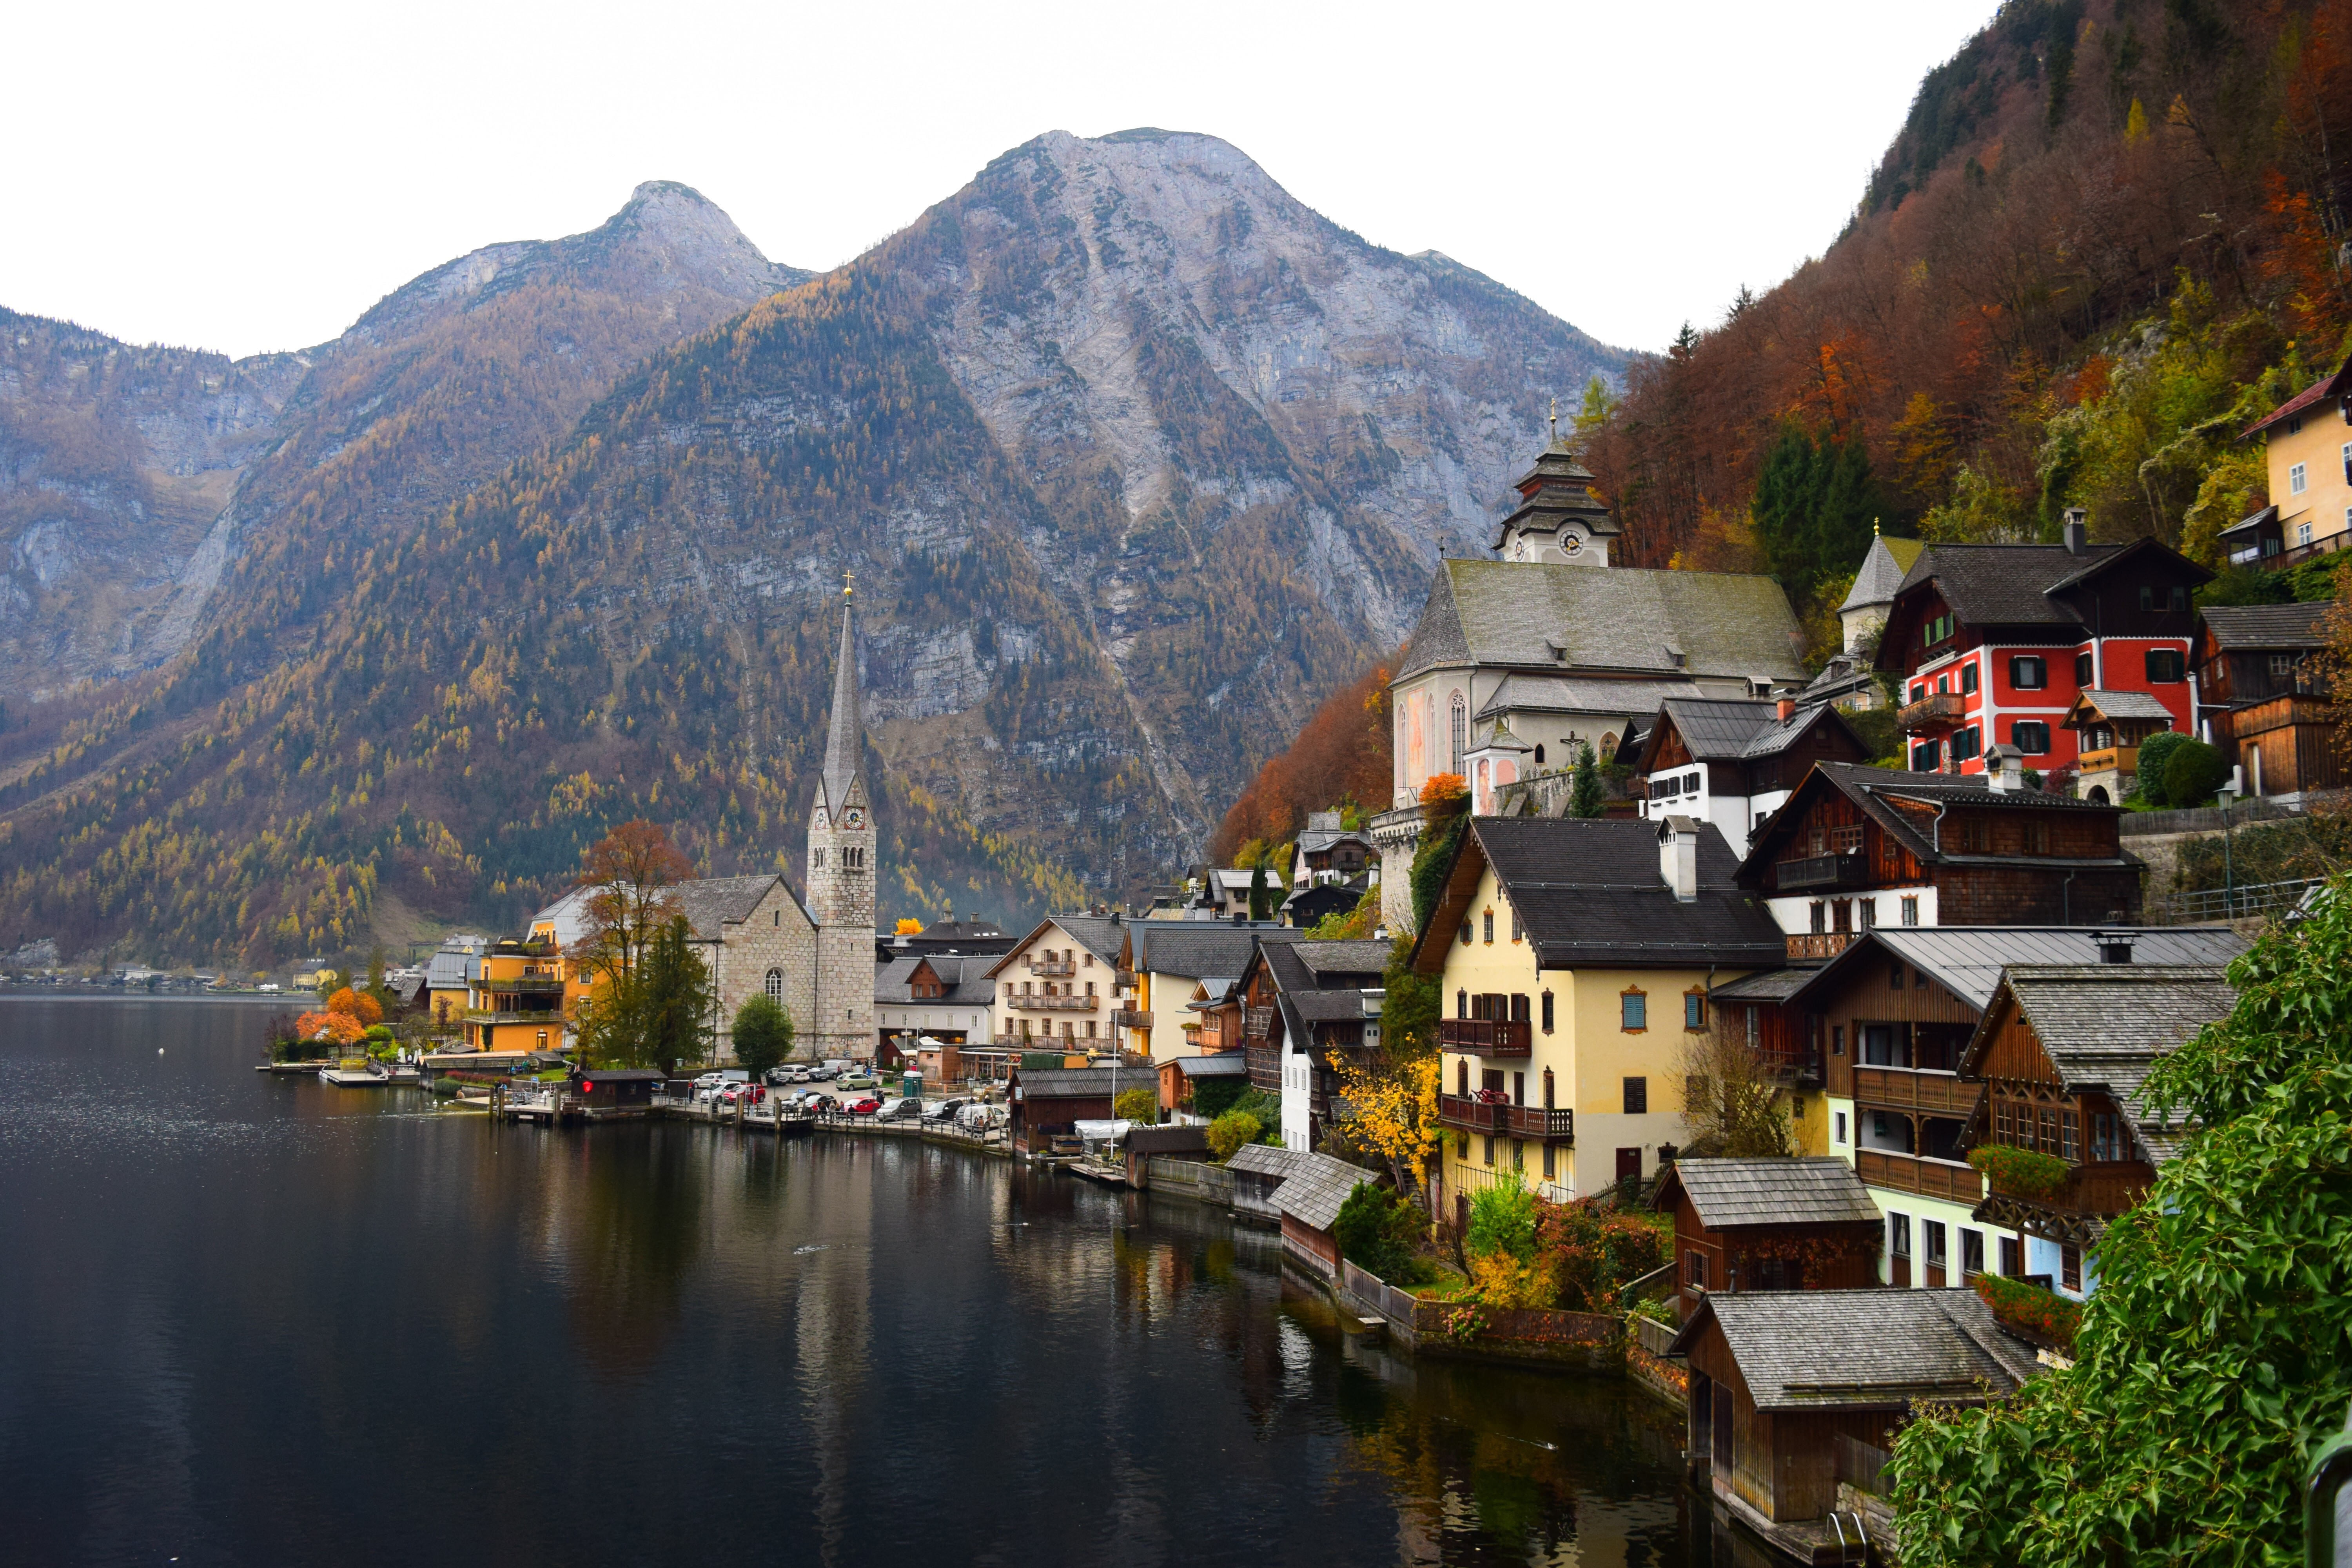 Looking for a second passport? Postcard perfect Austria is one of the most sought-after but also most expensive destinations for citizenship-by-investment schemes. Photo: Unsplash